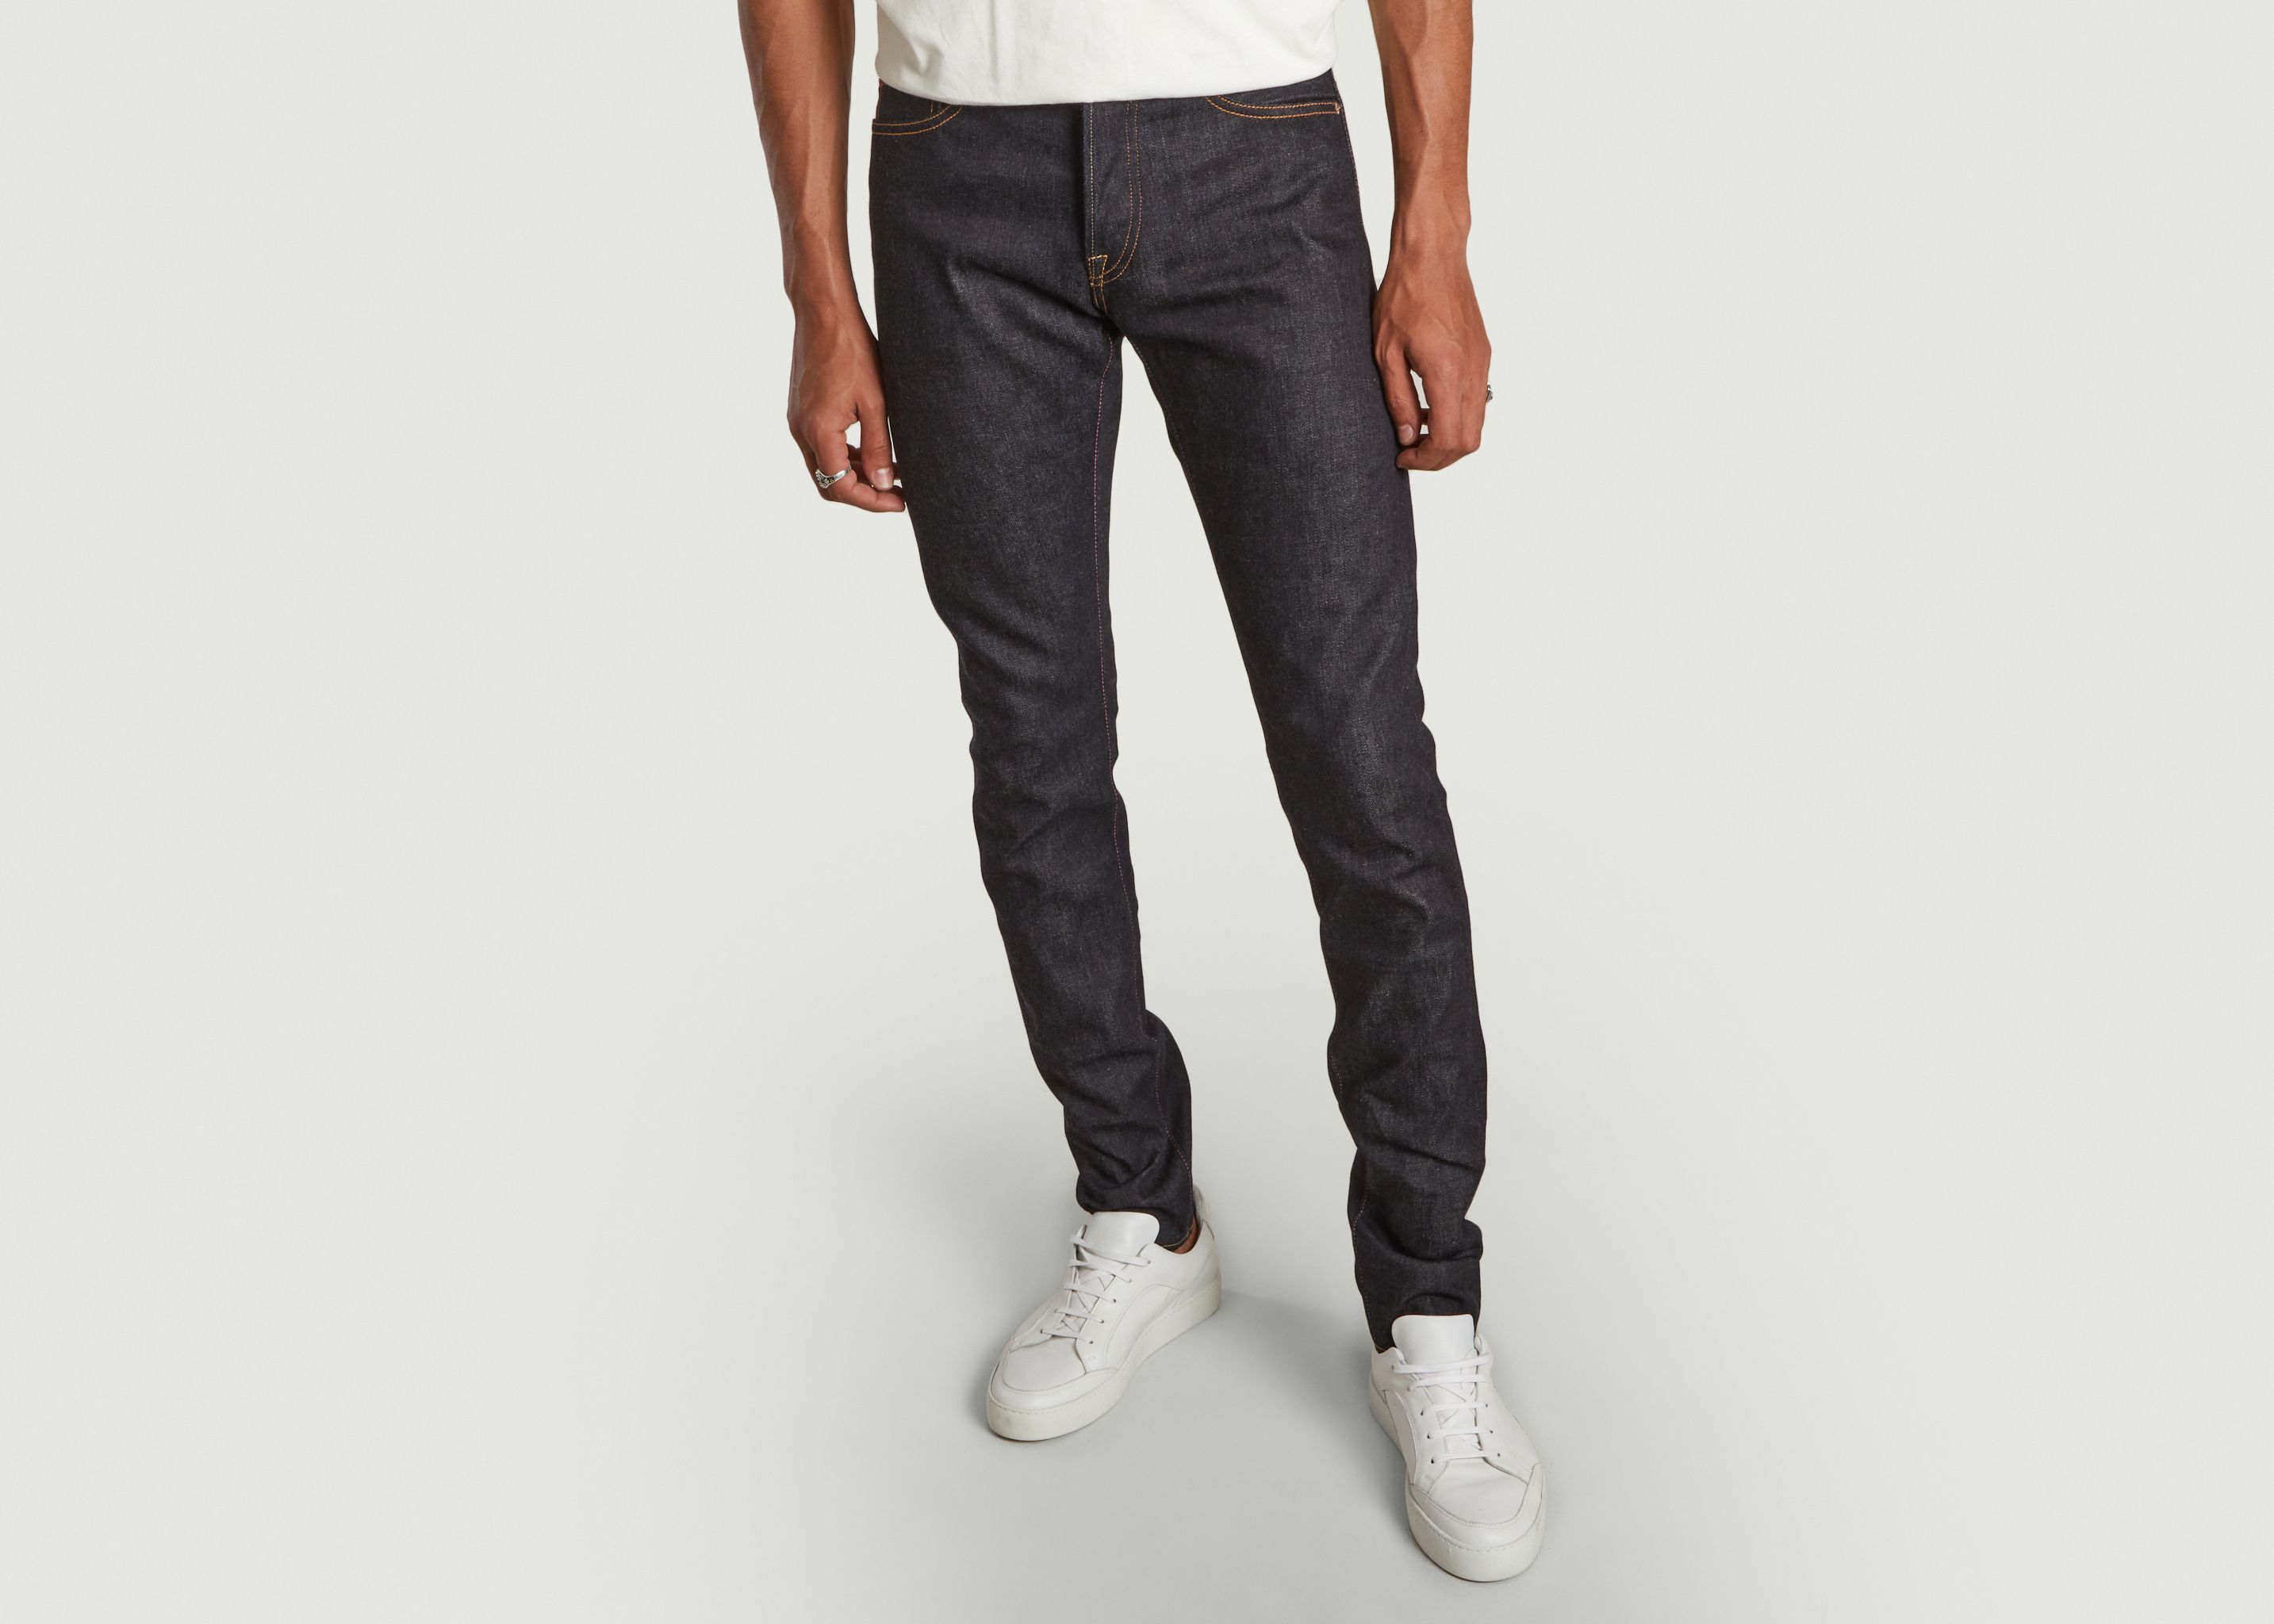 Jean 0405 Going To Battle 12oz High Tapered - Momotaro Jeans